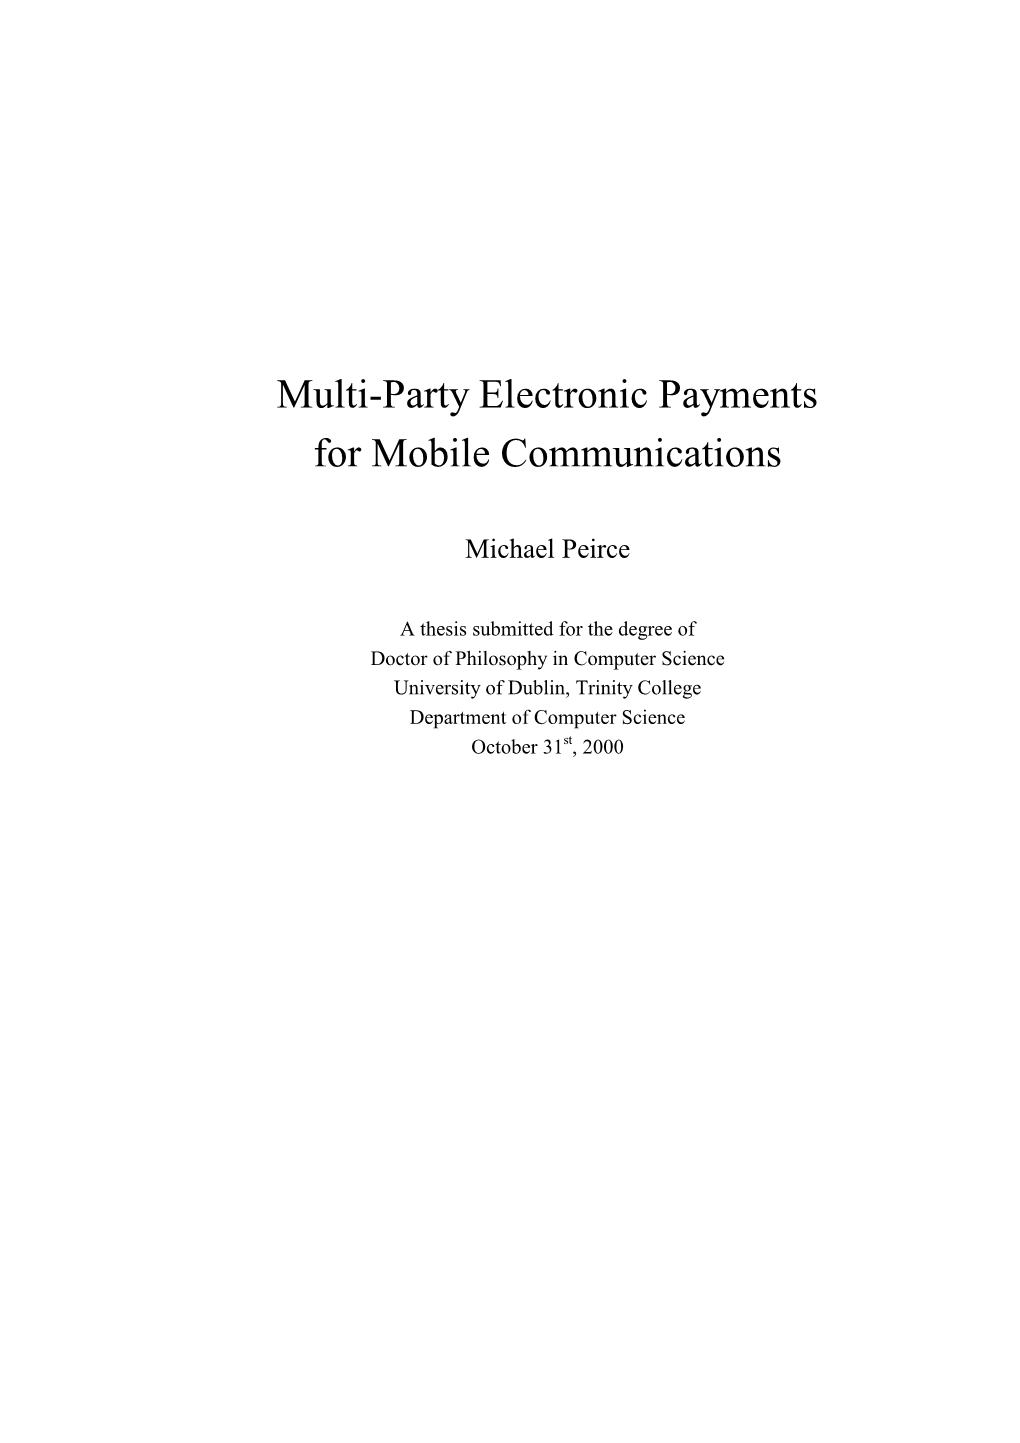 Multi-Party Electronic Payments for Mobile Communications